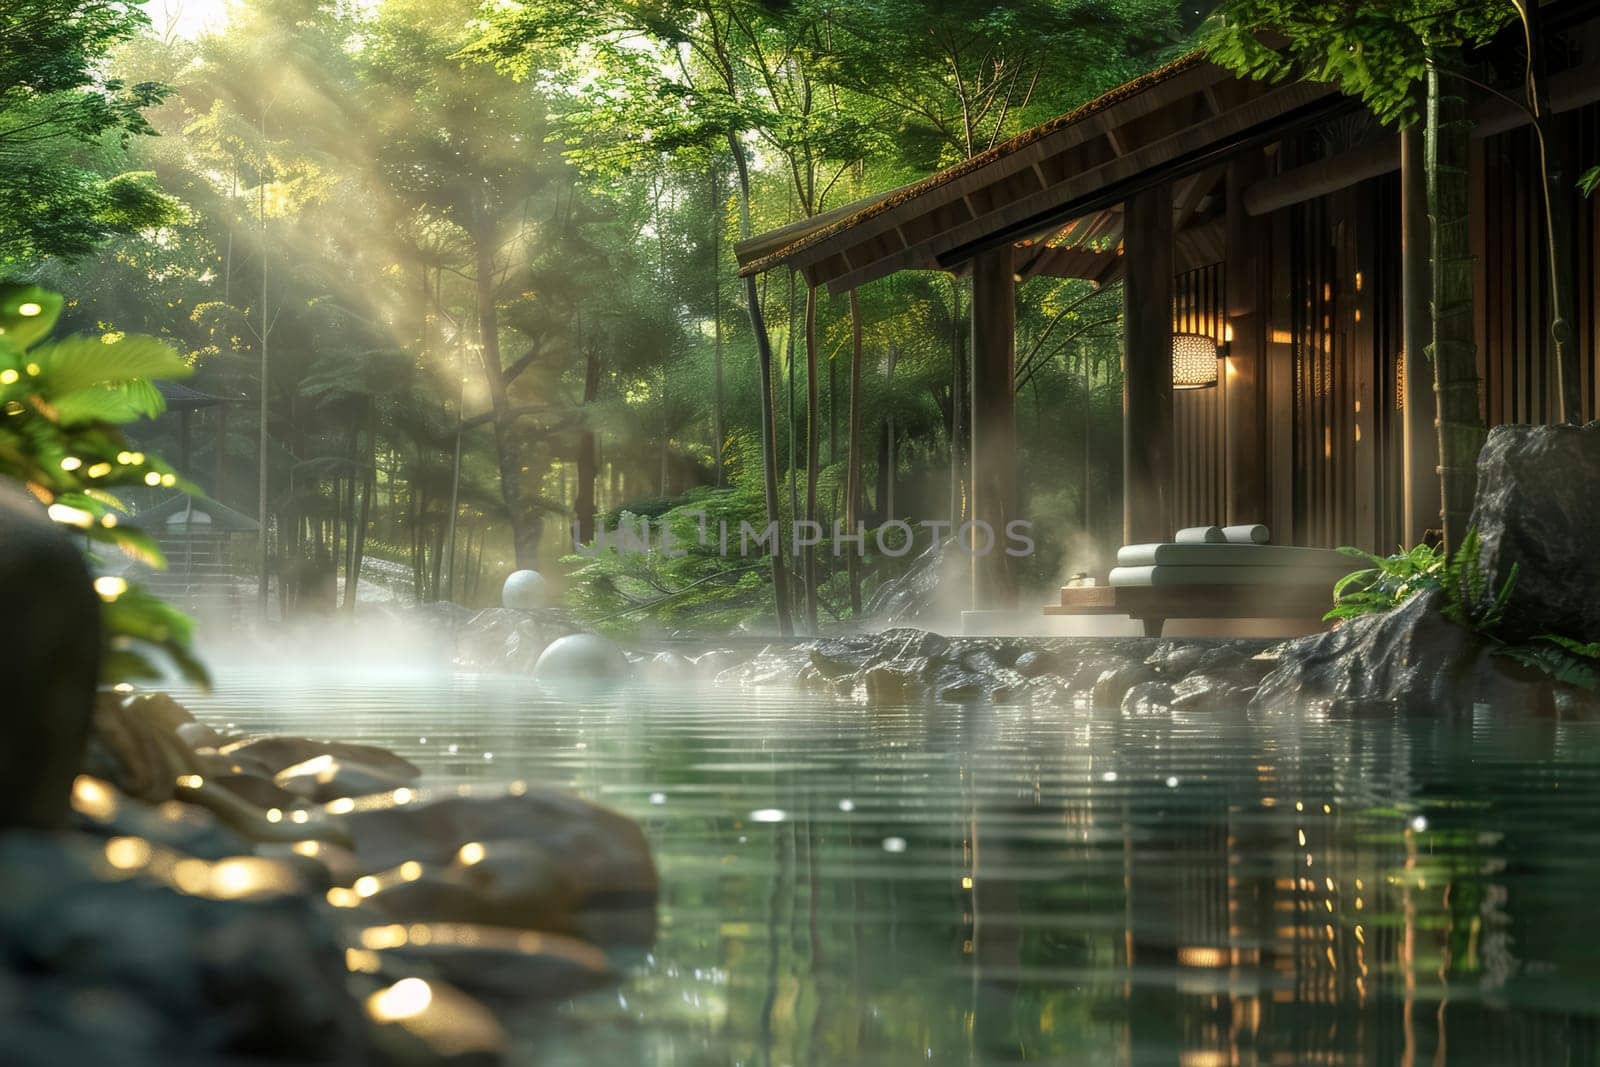 A tranquil spa retreat enveloped in a lush forest setting, with mist rising from a hot pool surrounded by natural stones. Sunlight filters through the trees, enhancing the serene atmosphere